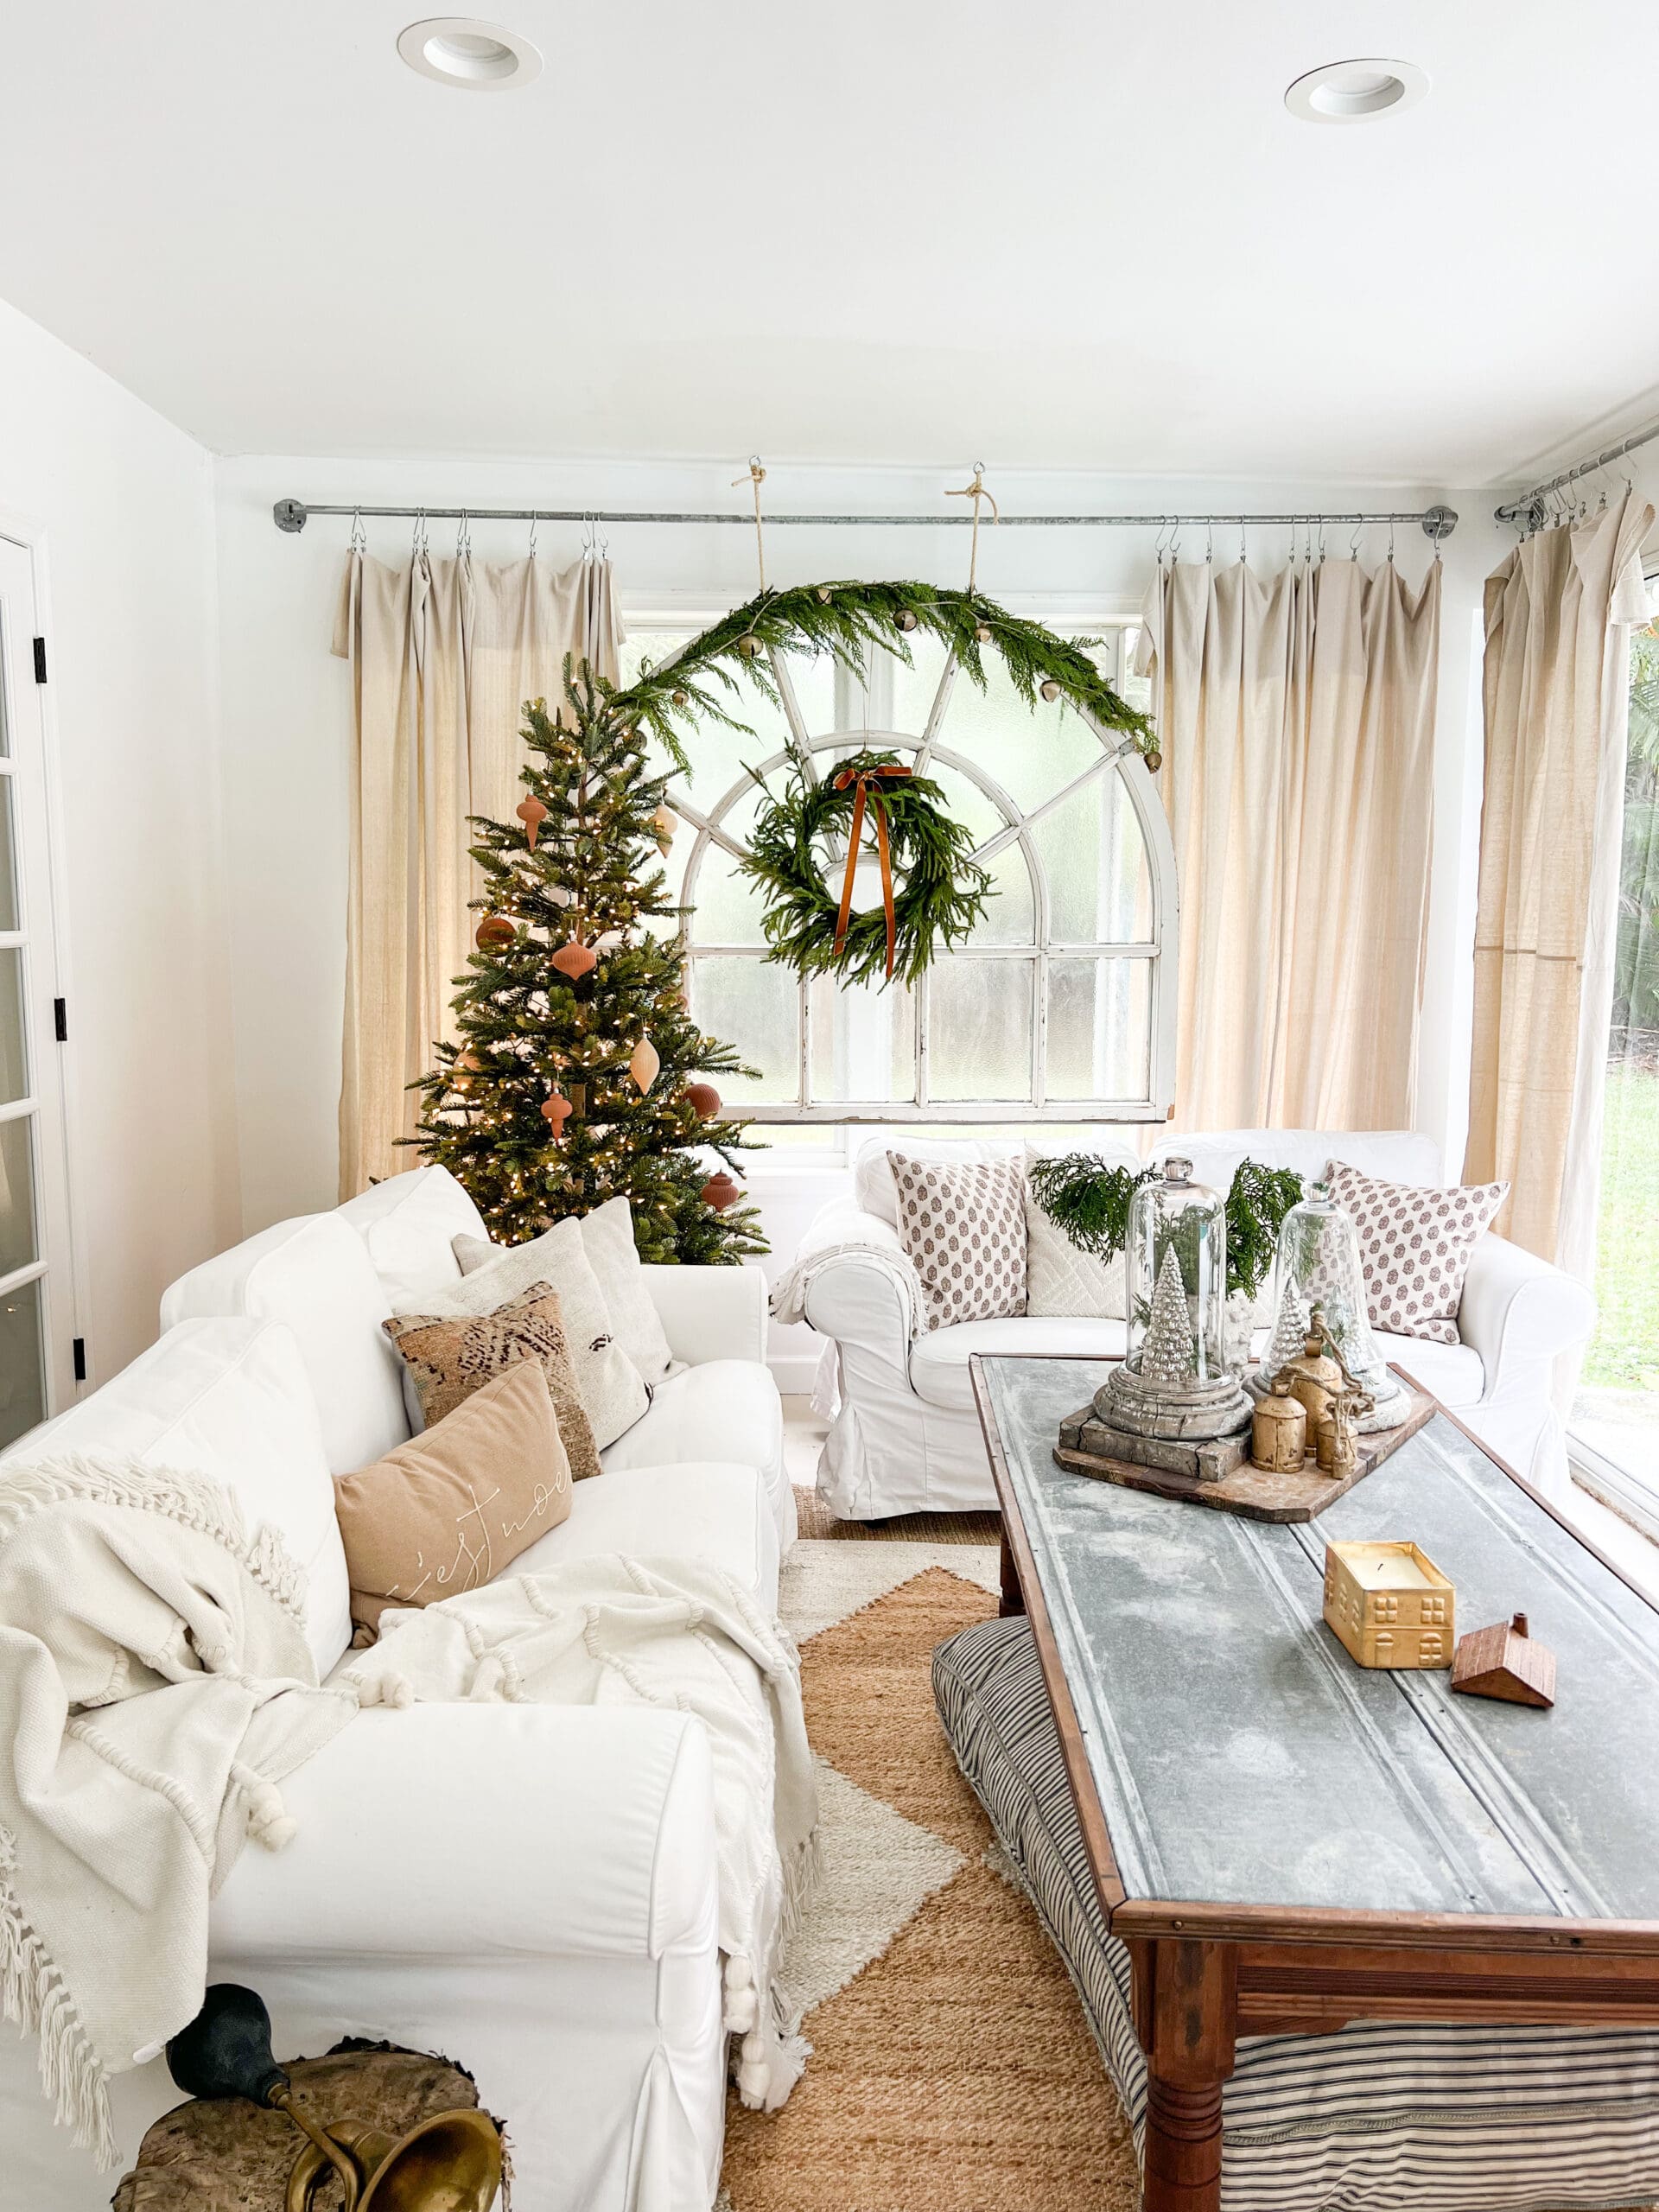 view of living space with a sparse Christmas tree, a large window styled with greenery, and a cozy white couch with comfy Christmas pillows